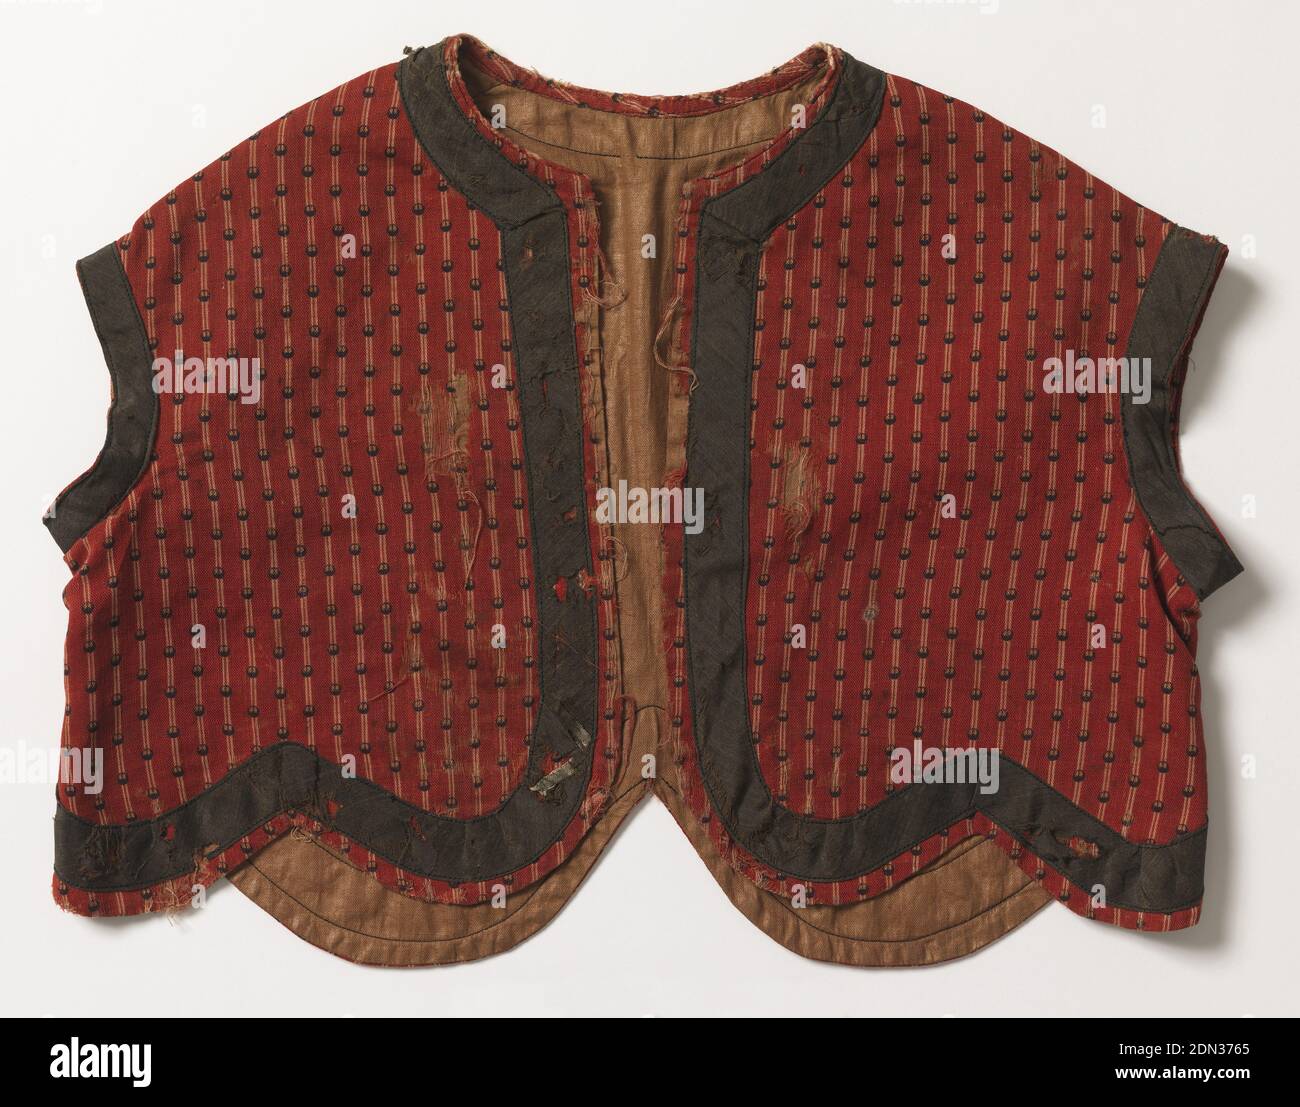 Vest, Medium: wool, glazed cotton Technique: printed, child's short jacket of red wool, striped in white and printed, over-stripe in small black dots. Roud neck, no sleeve, shaped, scalloped bottom. Trimmed with band of black wool around neck, arm hole and bottom, light brown glazed cotton lining. Machine sewn., ca. 1860, printed, dyed & painted textiles, Vest Stock Photo